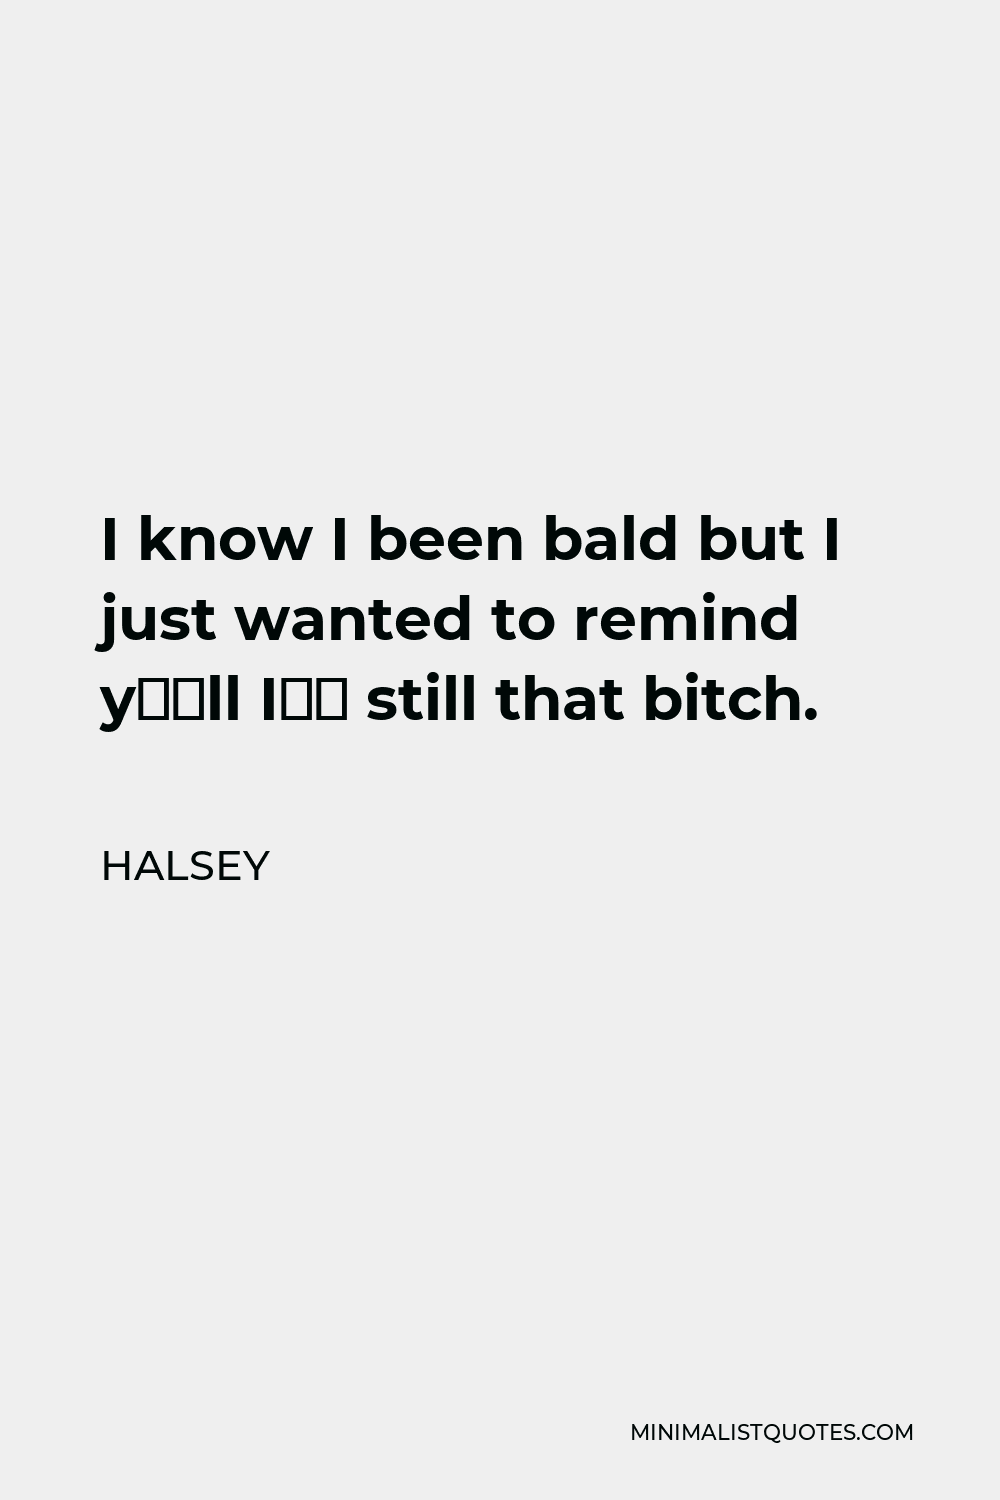 Halsey Quote - I know I been bald but I just wanted to remind y’all I’m still that bitch.